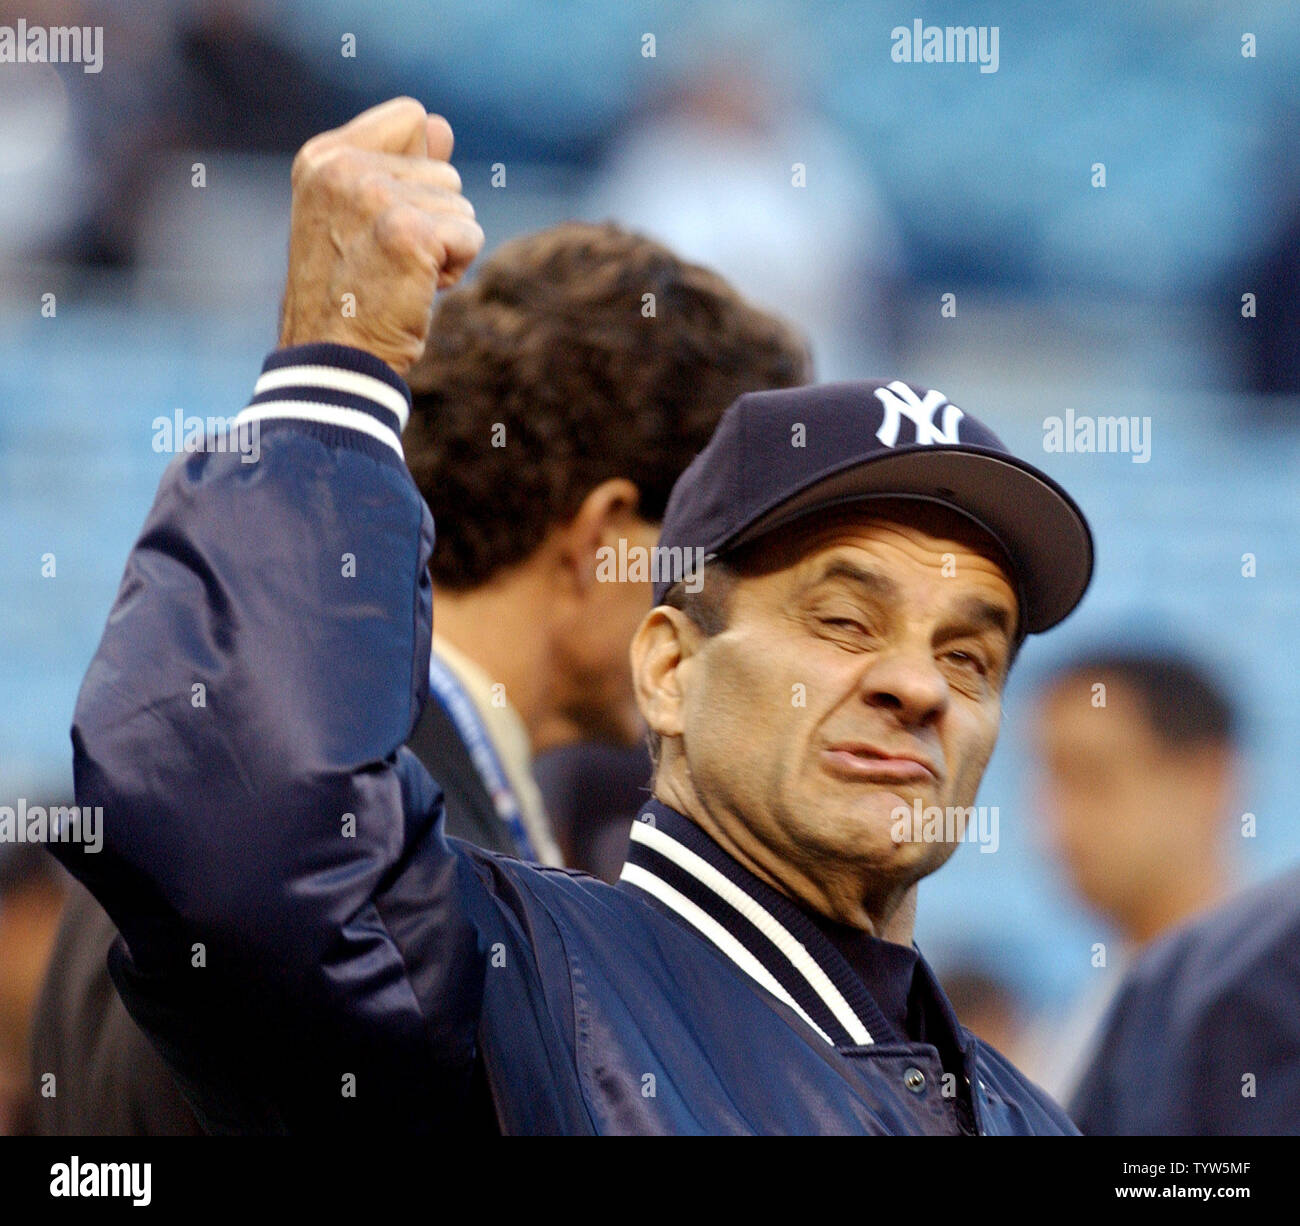 New York Yankees manager Joe Torre jokes around with reporters before Game 2 of the World Series against the Florida Marlins on October 19, 2003, at Yankee Stadium. The Marlins defeated the Yankees 3-2 in Game 1.    (UPI/Roger L. Wollenberg) Stock Photo